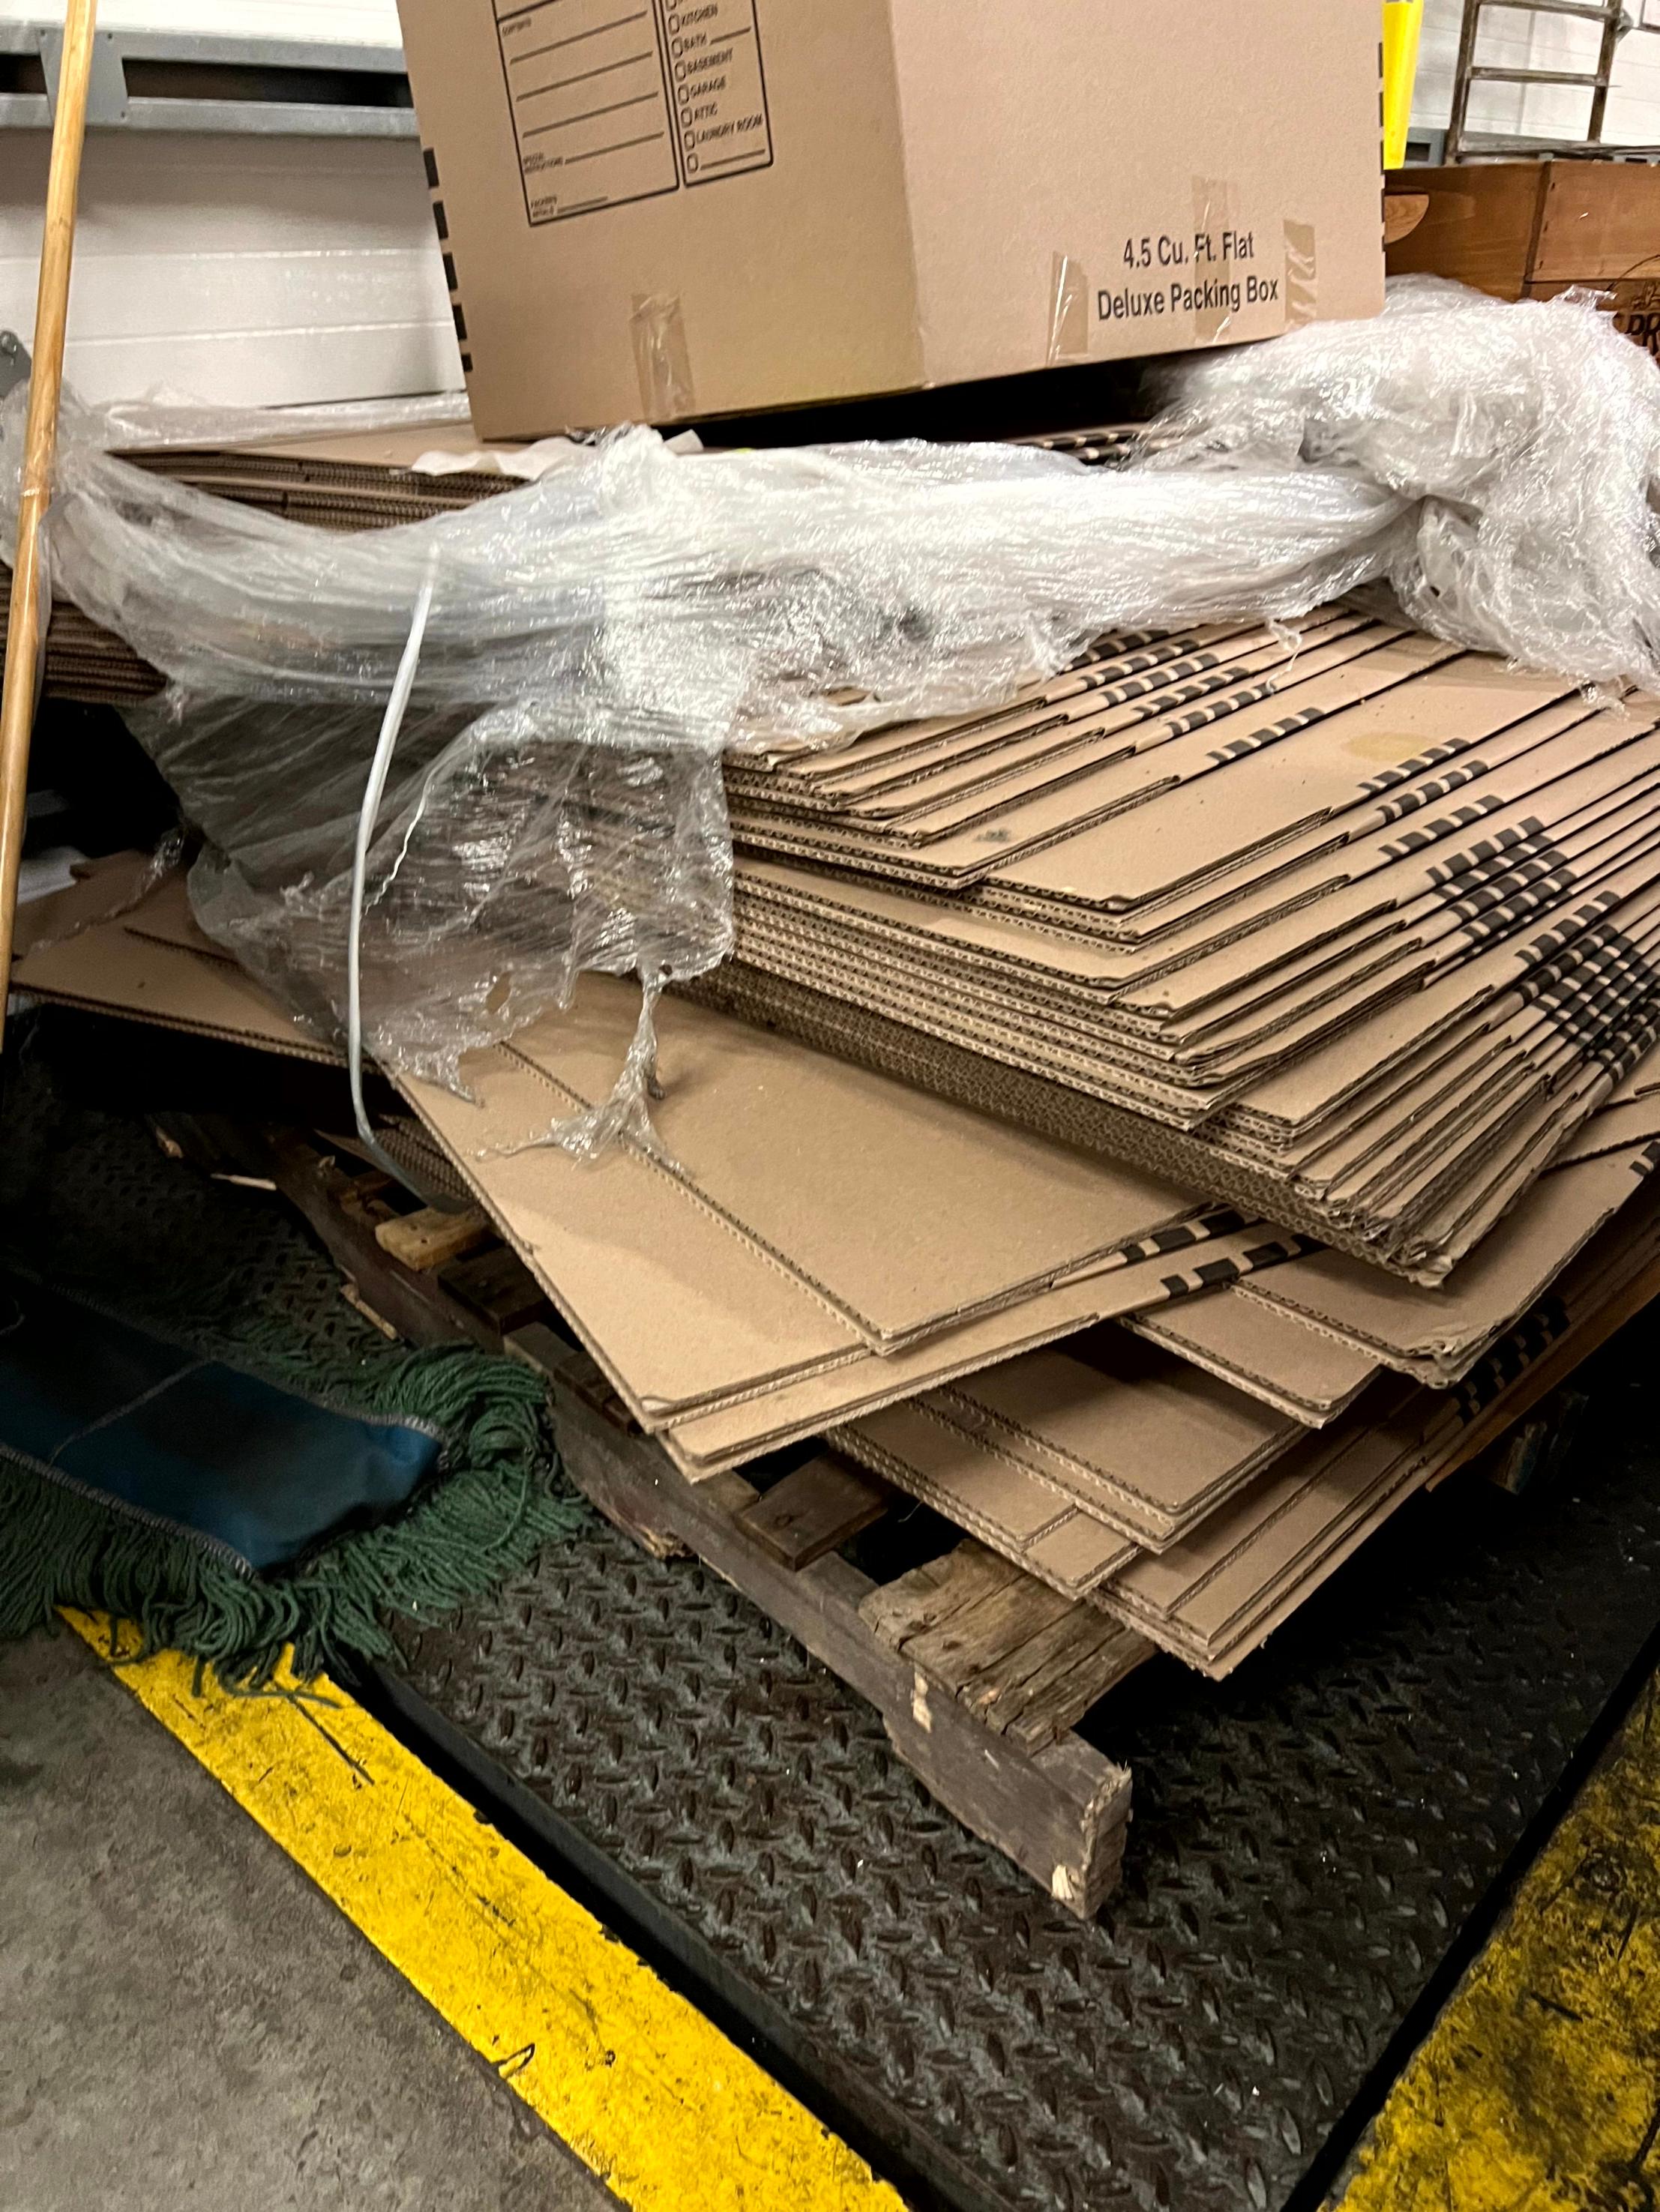 Group of Cardboard Boxes